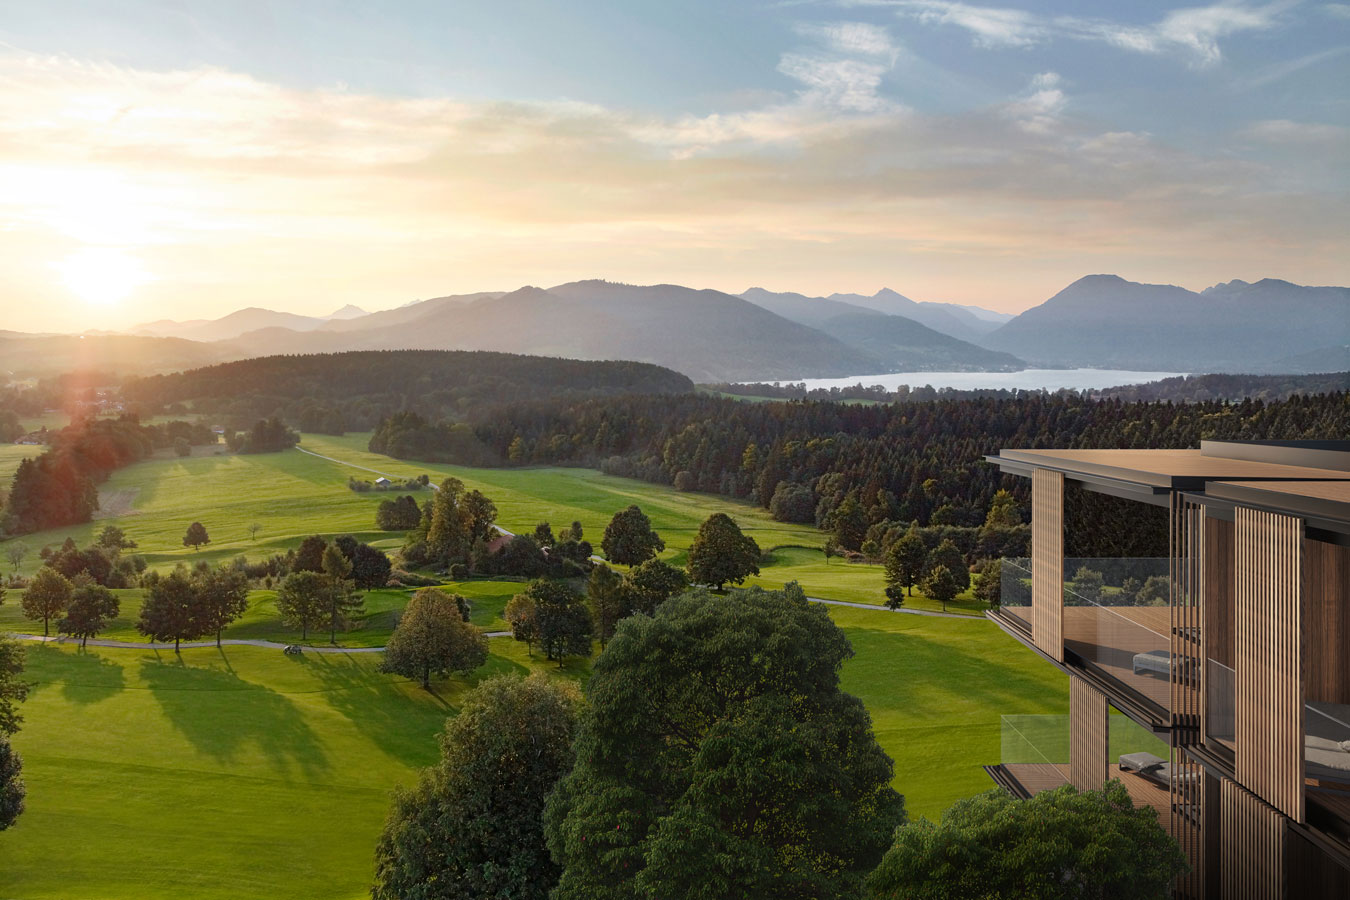 Lanserhof Tegernsee - A Gleaming Mayr Clinic at the Foothills of the Bavarian Mountains